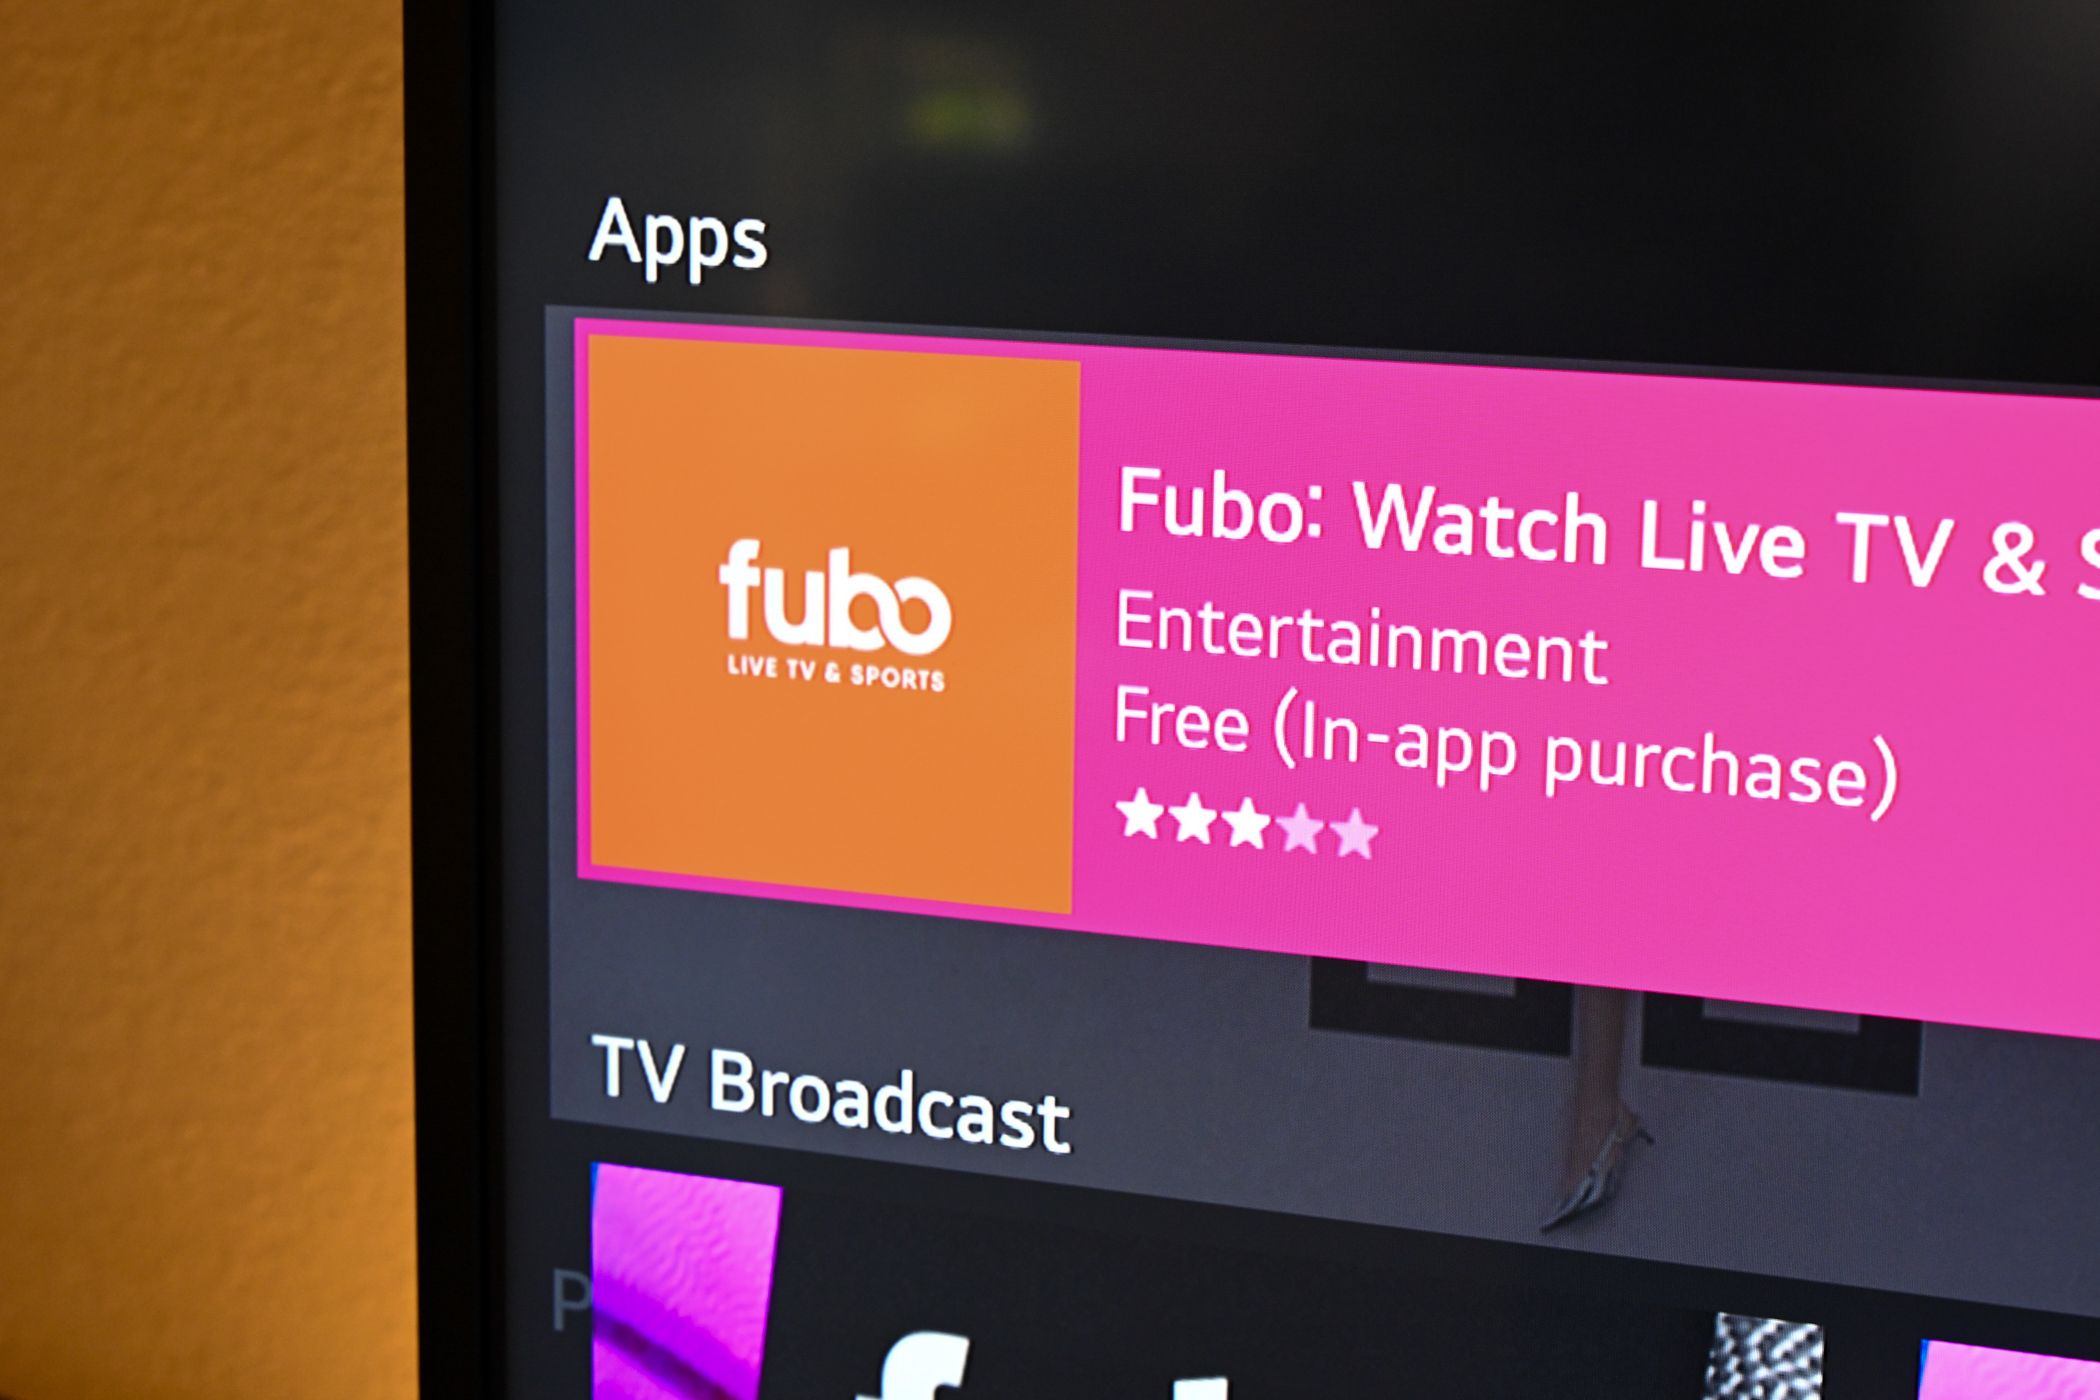 Fubo streaming app on a TV